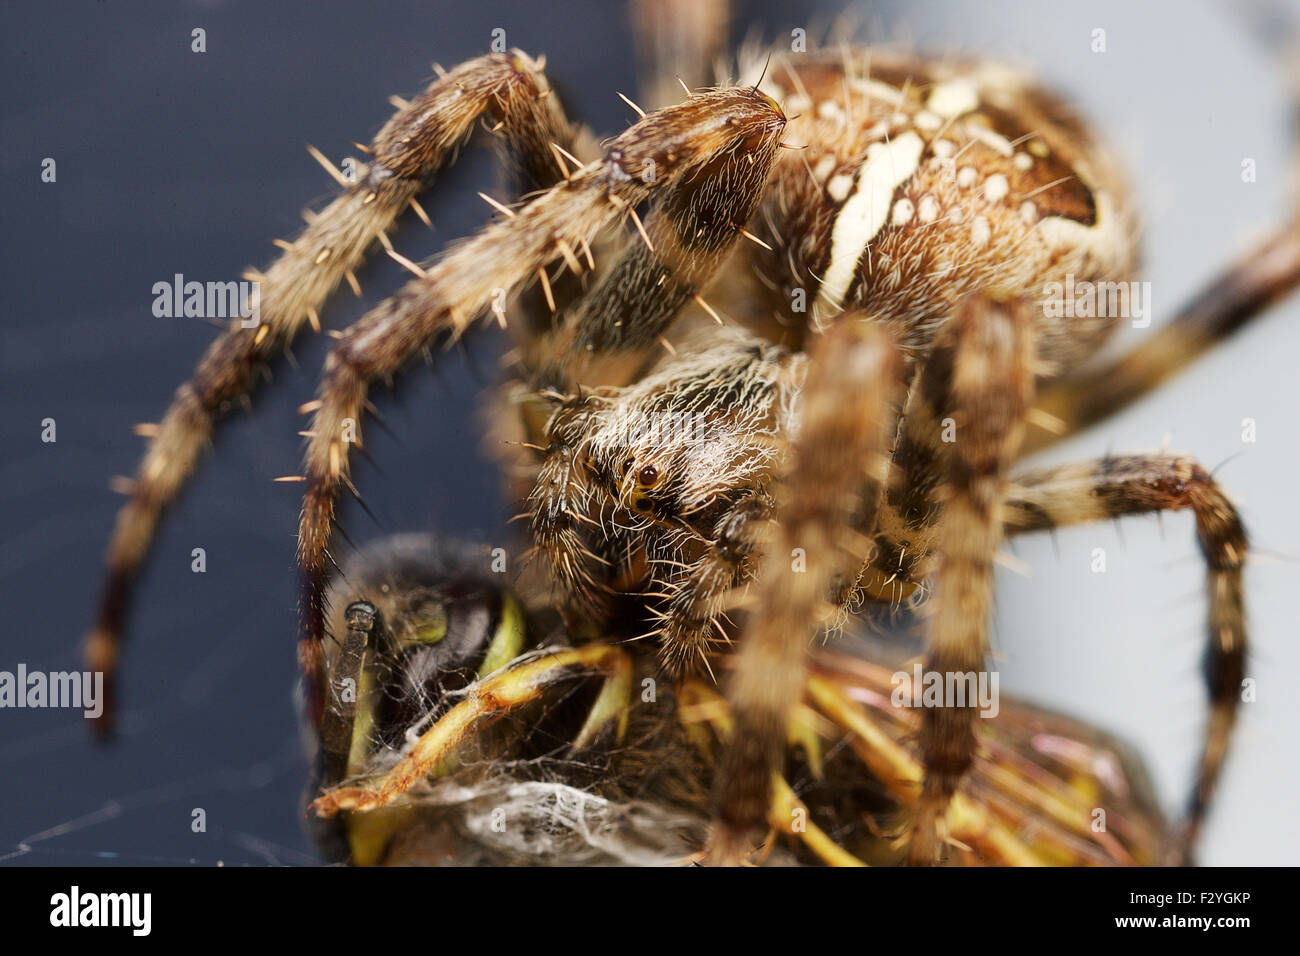 UK . European Garden spider closes in on it's prey - a wasp. Stock Photo